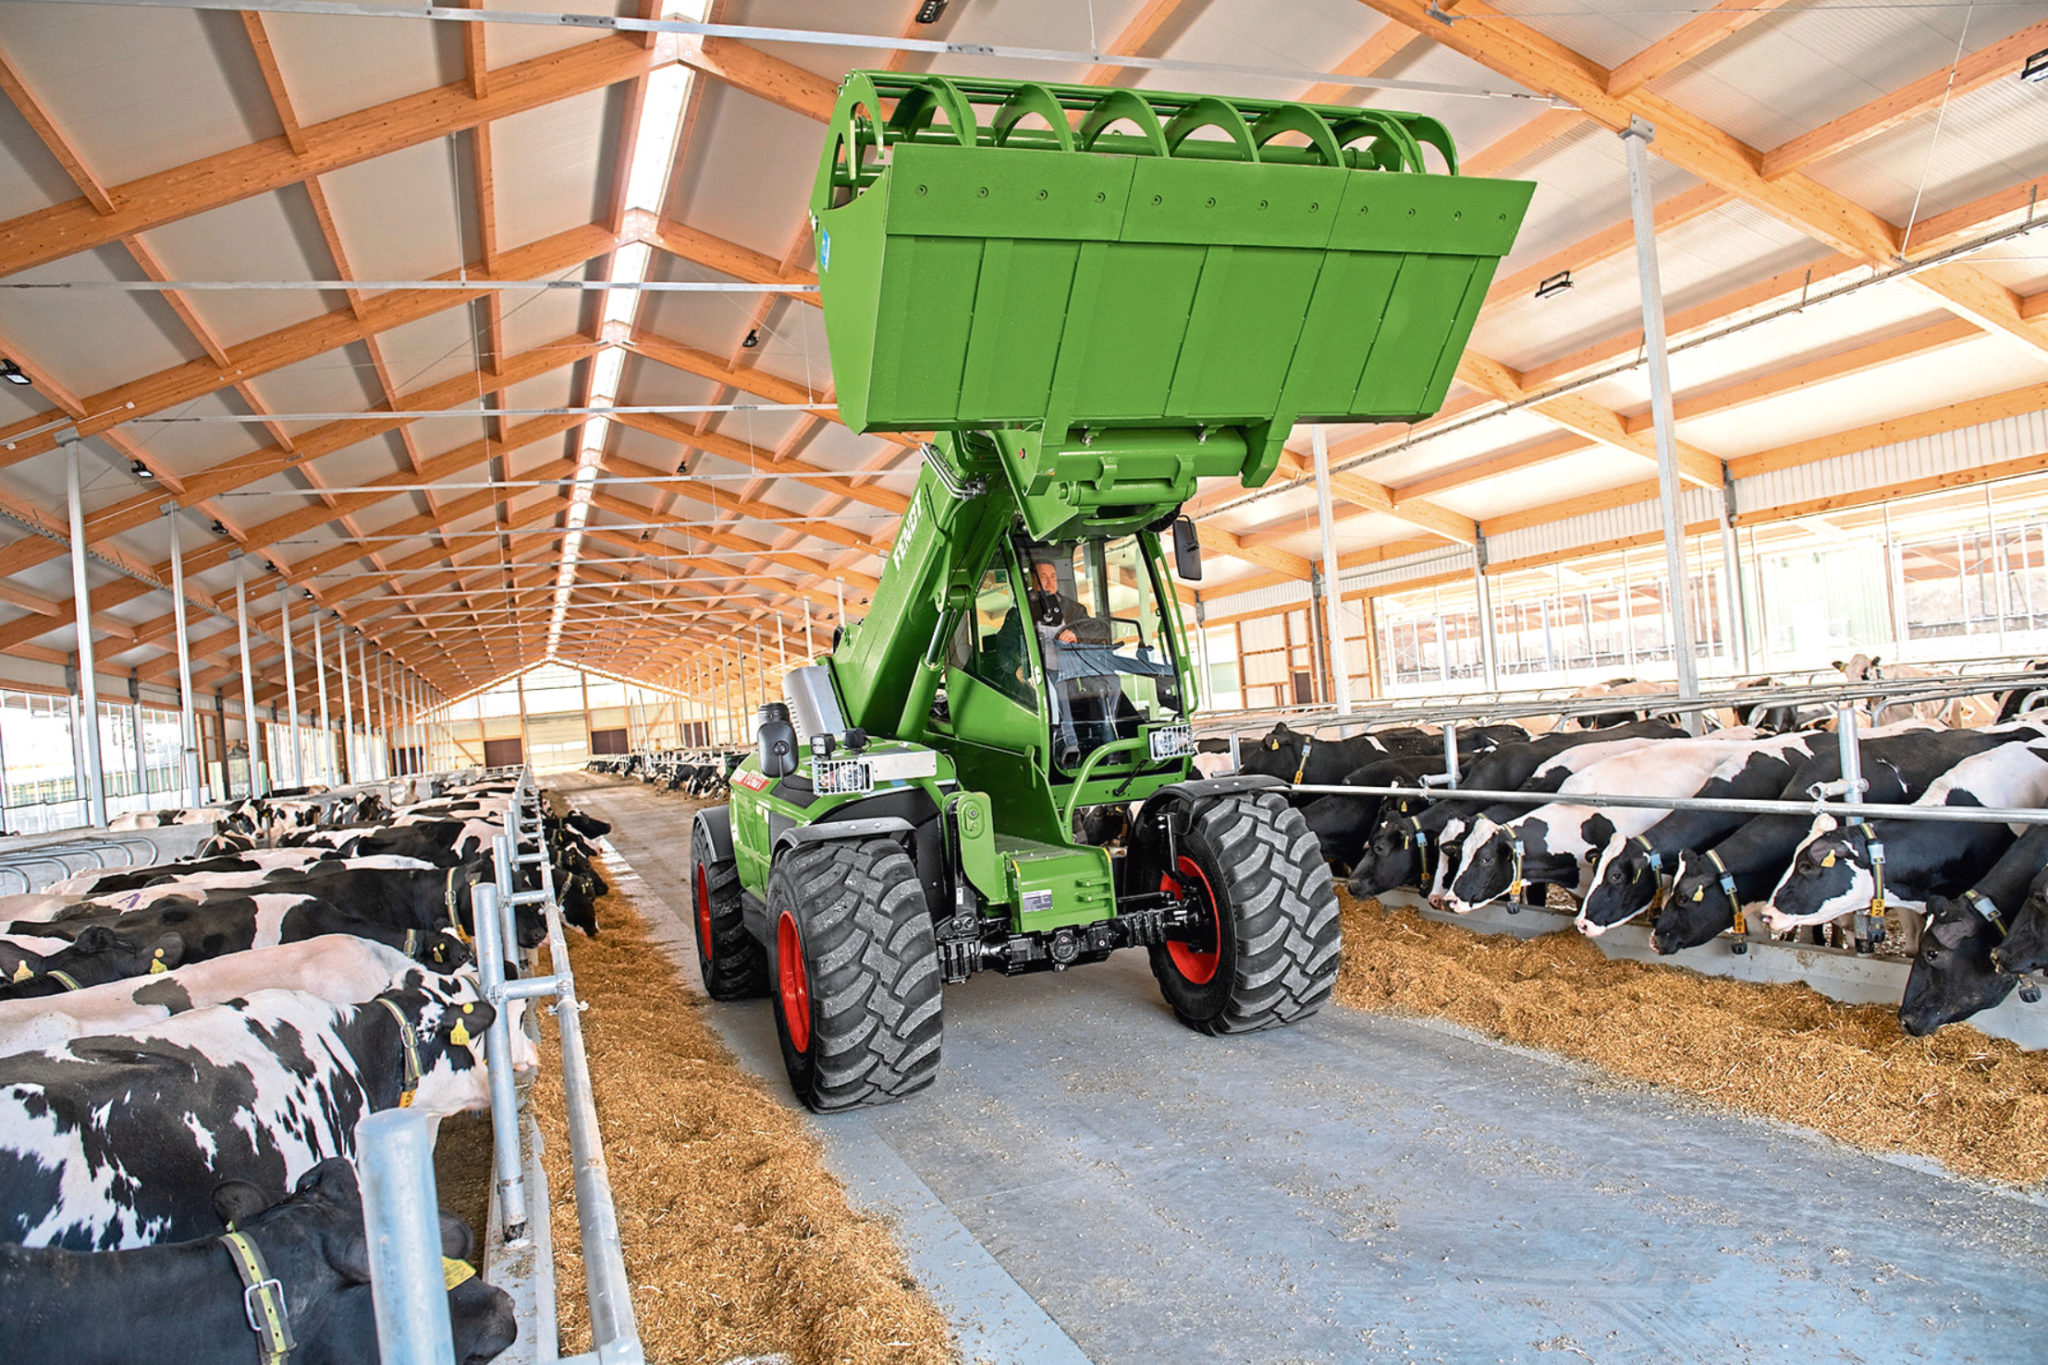 work tasks in line with farm operations